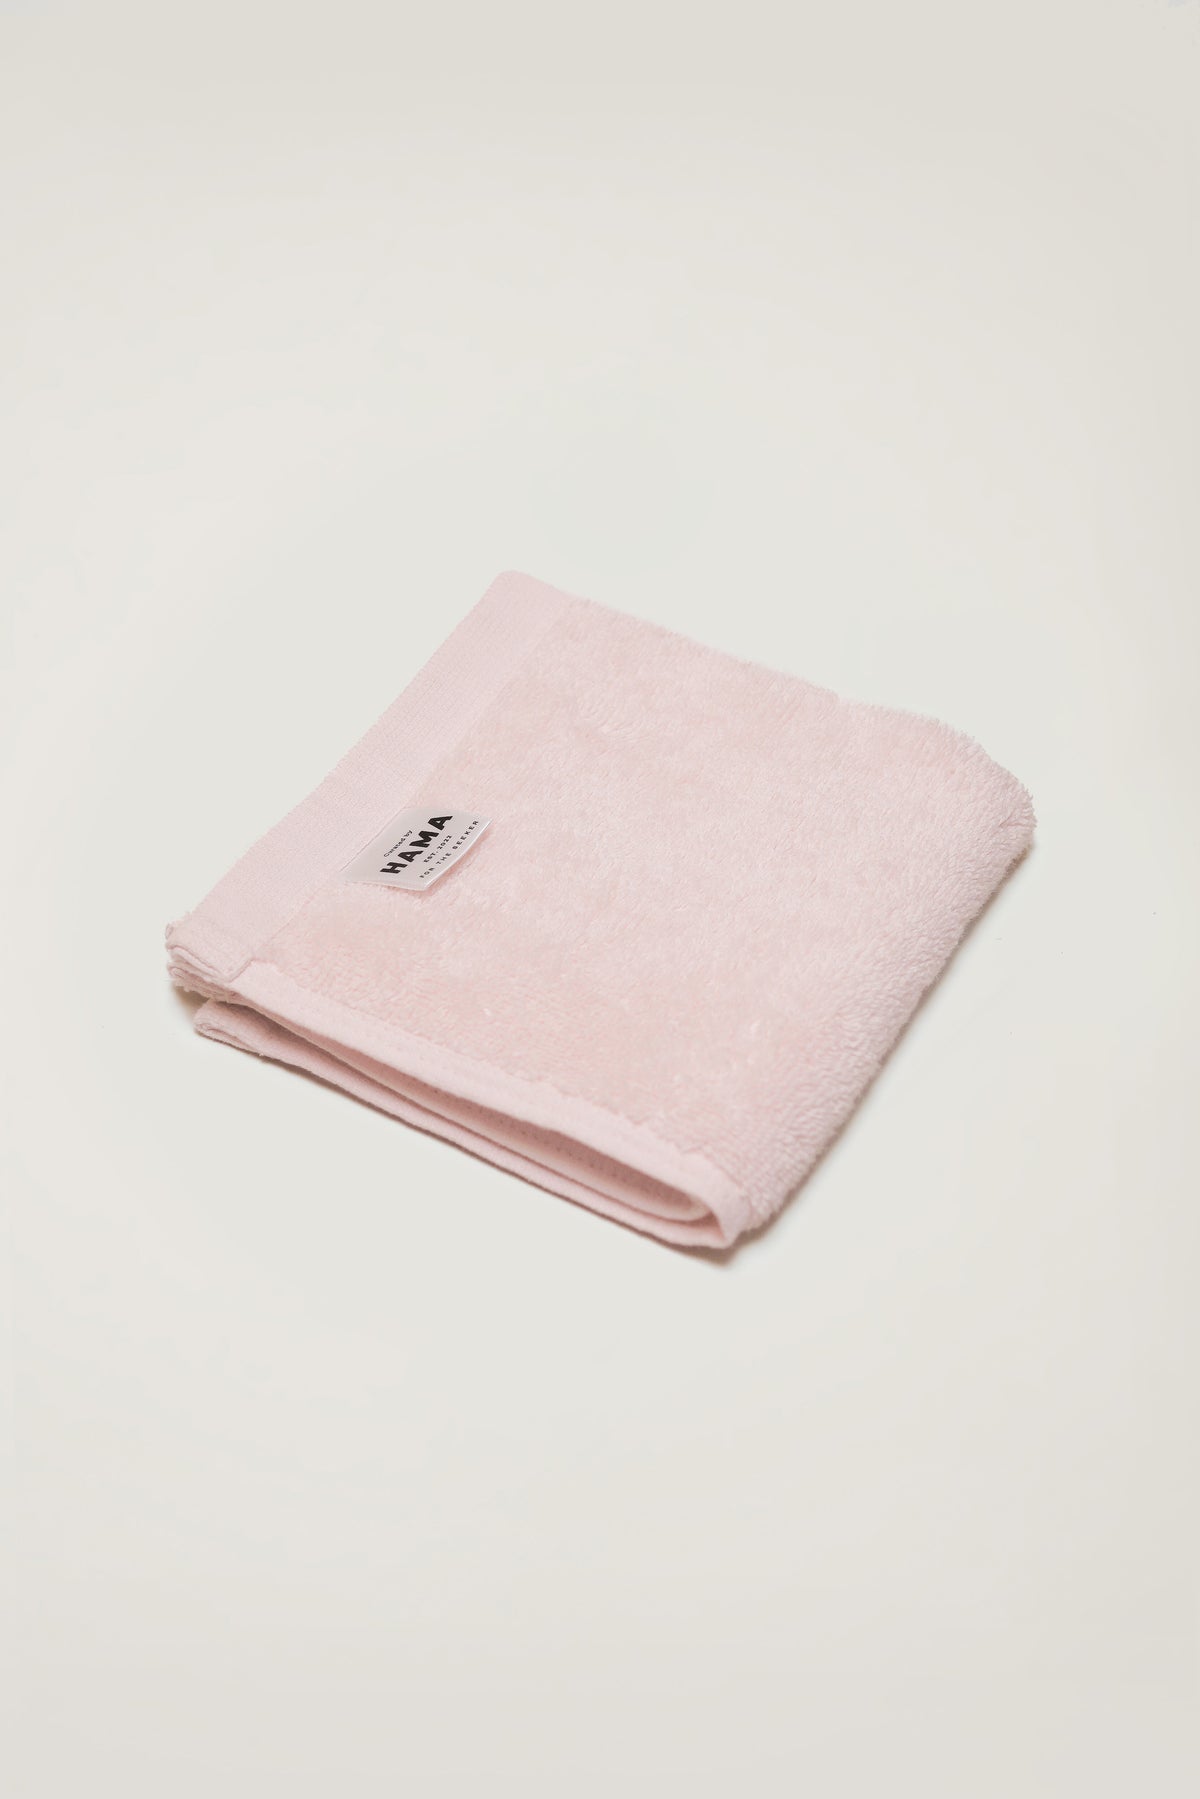 Danube, Classic Cotton Face Cloth in Morning Pink